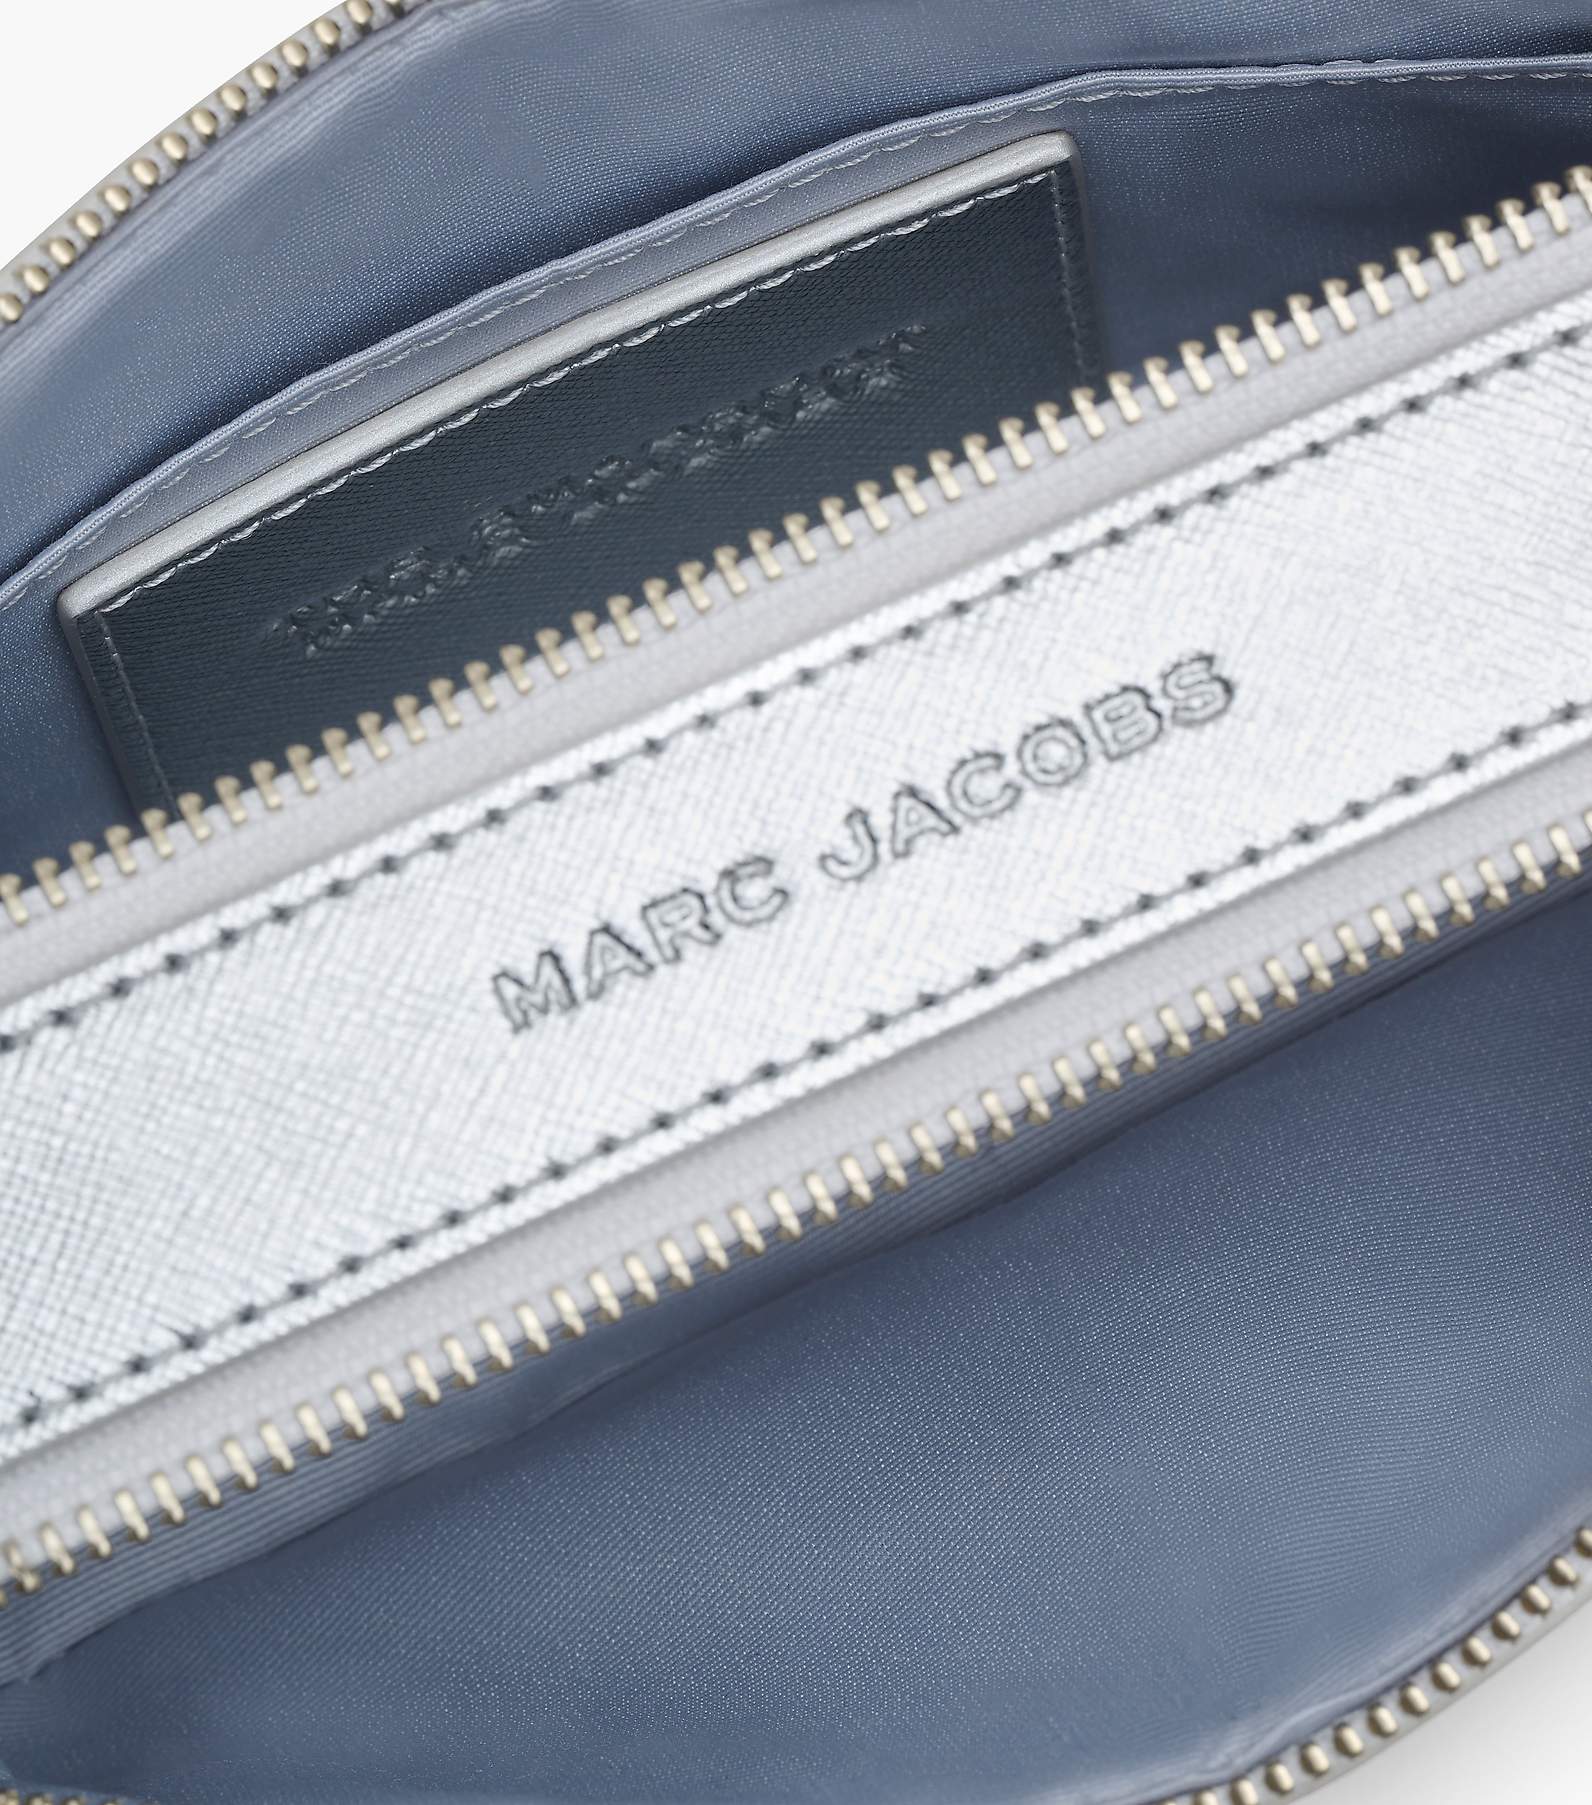 The Marc Jacobs The Snapshot DTM Metallic Silver in Saffiano